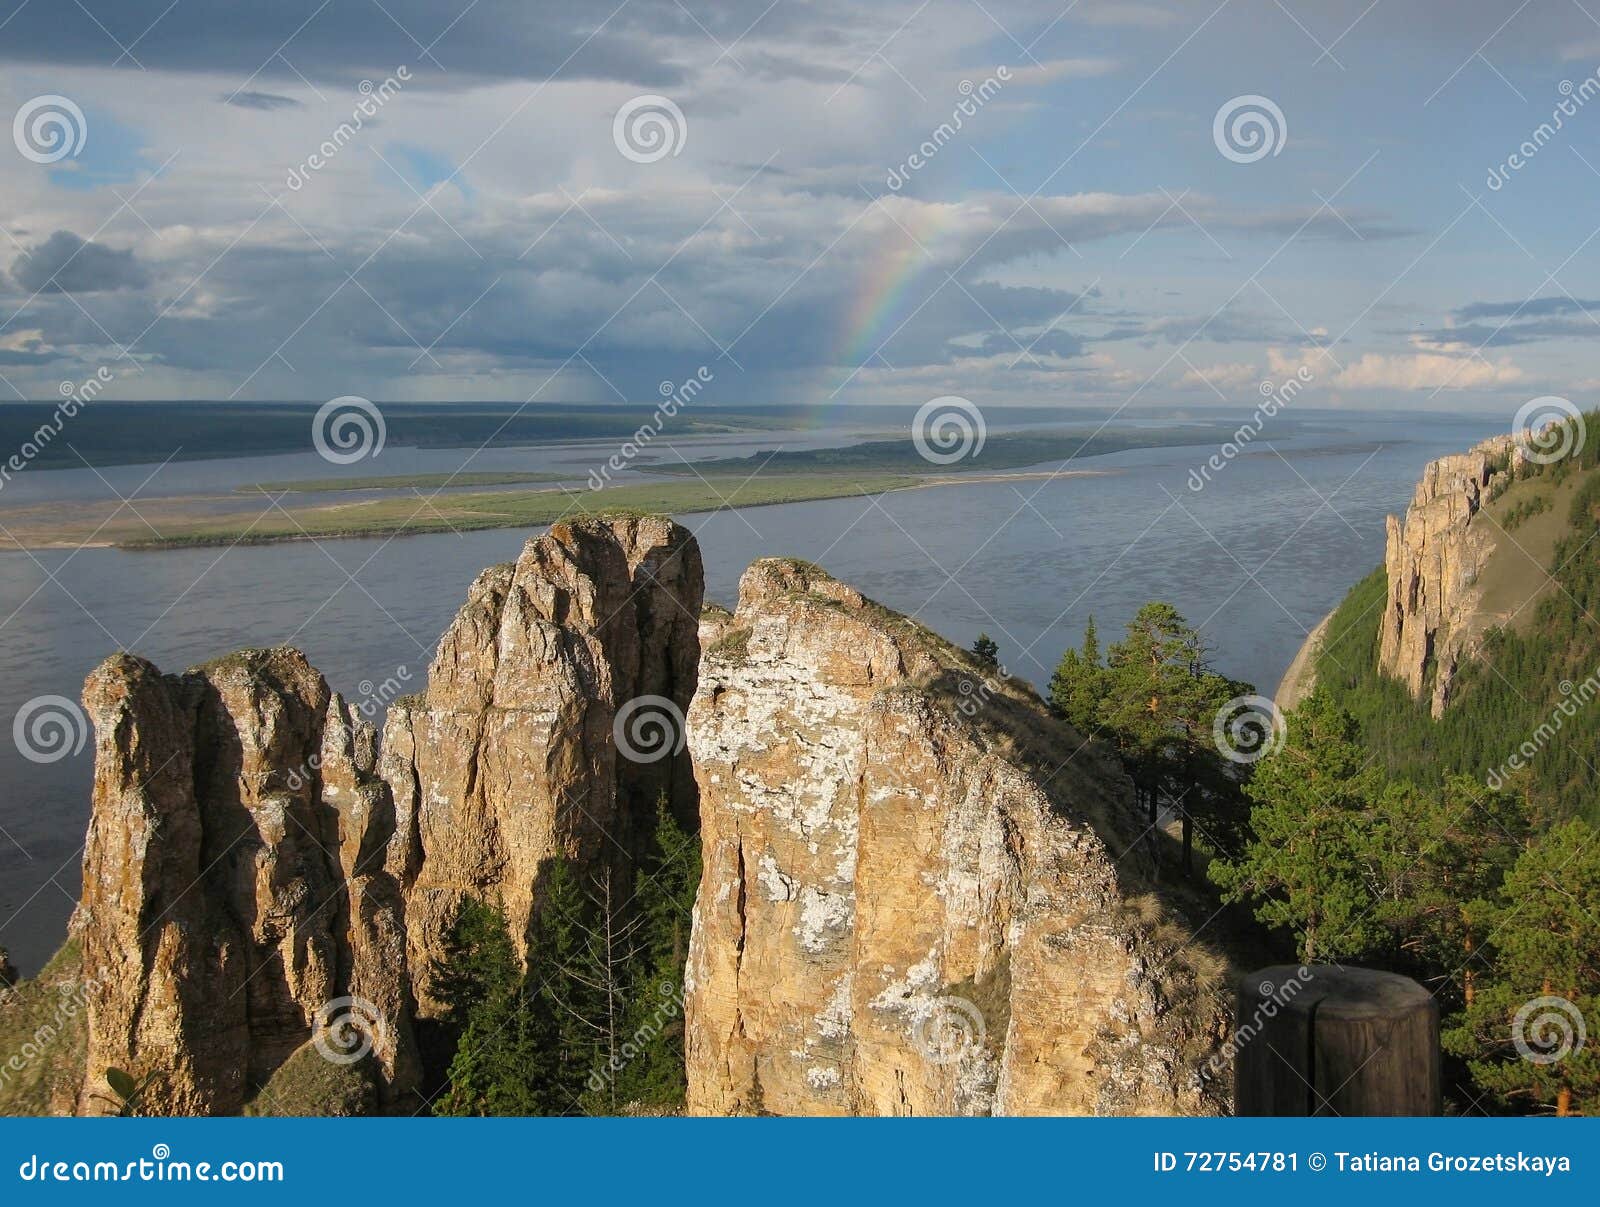 lenskie stolby national nature park in lena river, wild mountain